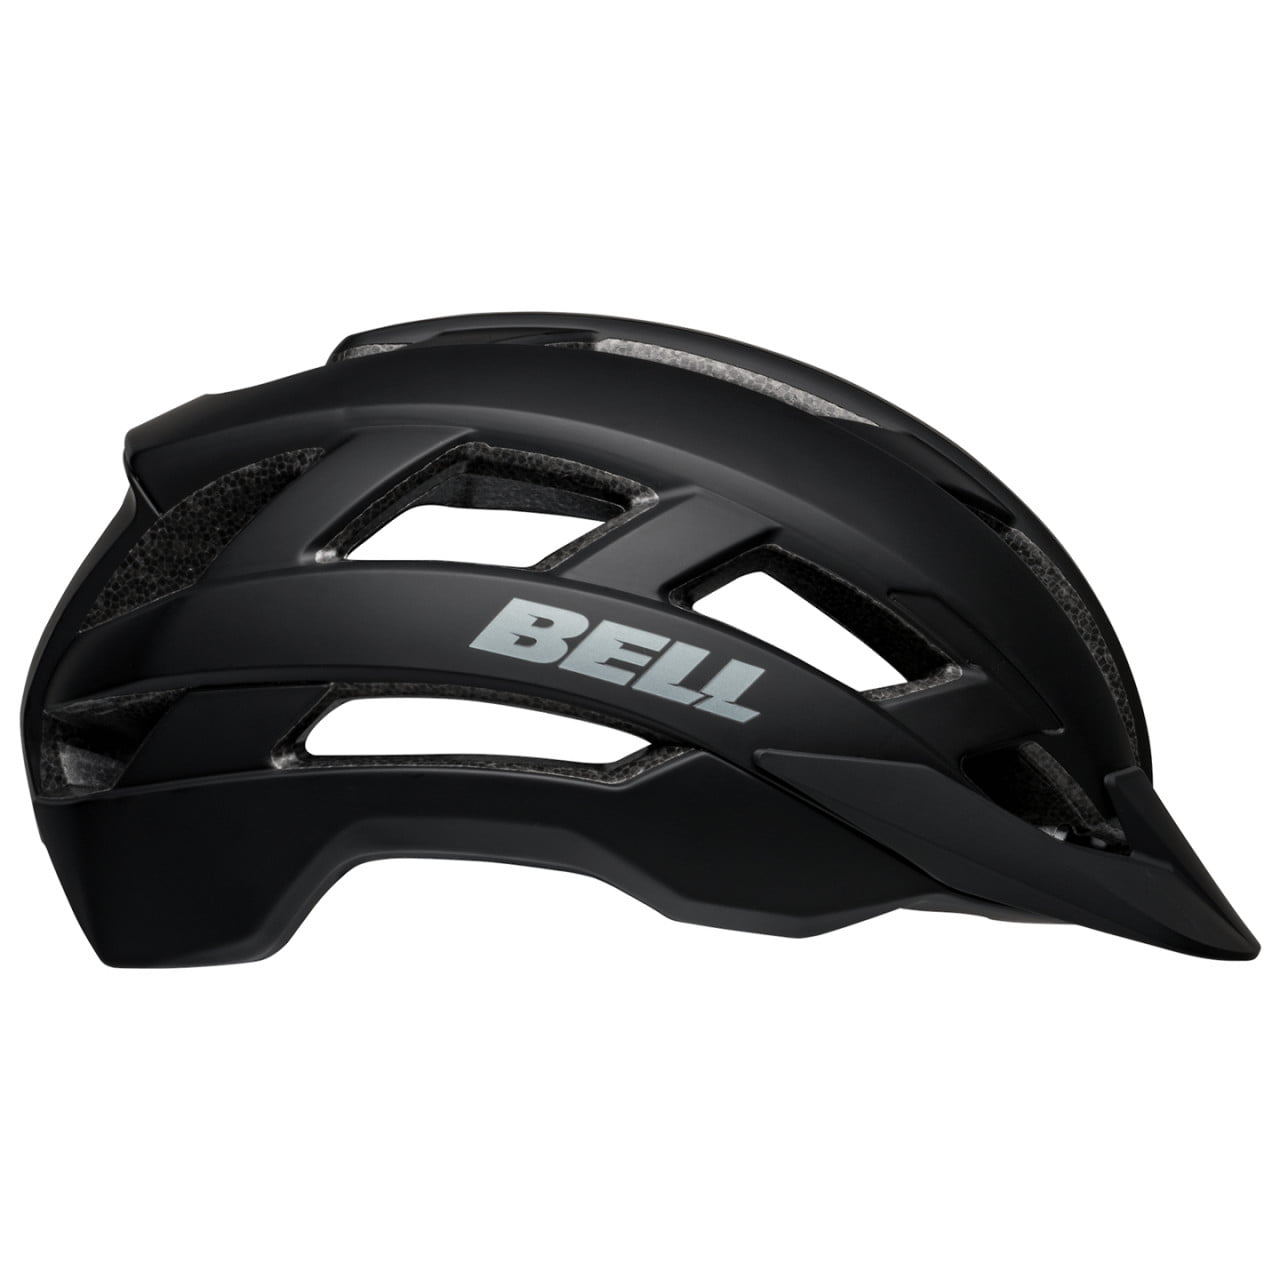 Kask rowerowy Falcon XRV Mips